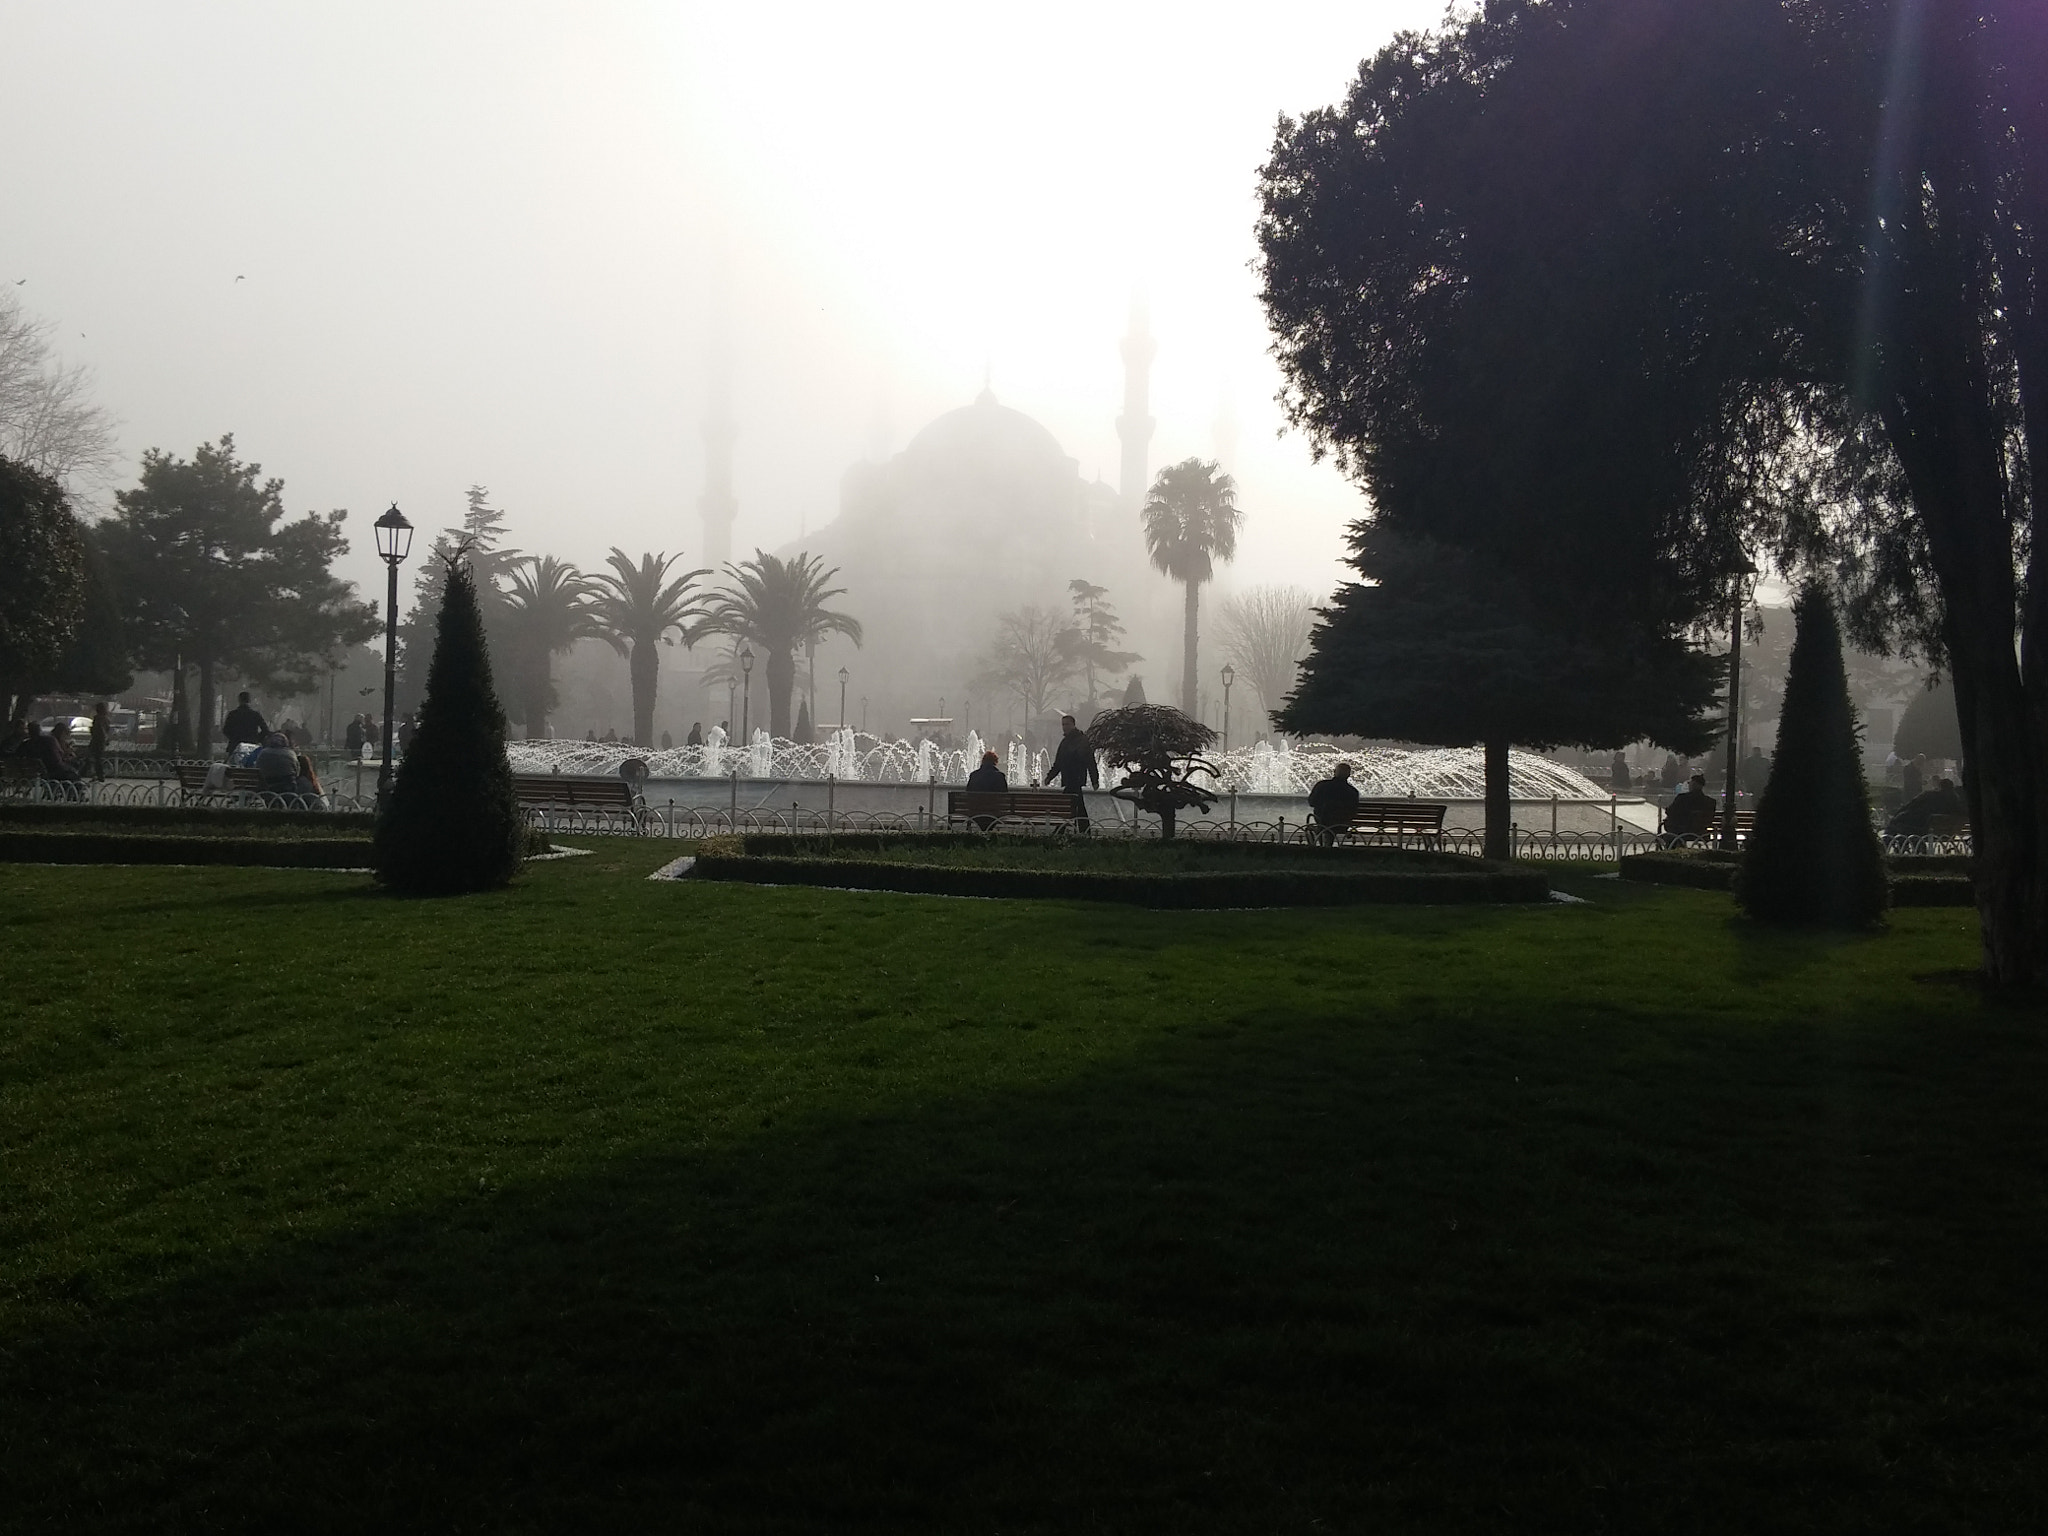 LG G Pro2 sample photo. Blue mosque in haze photography